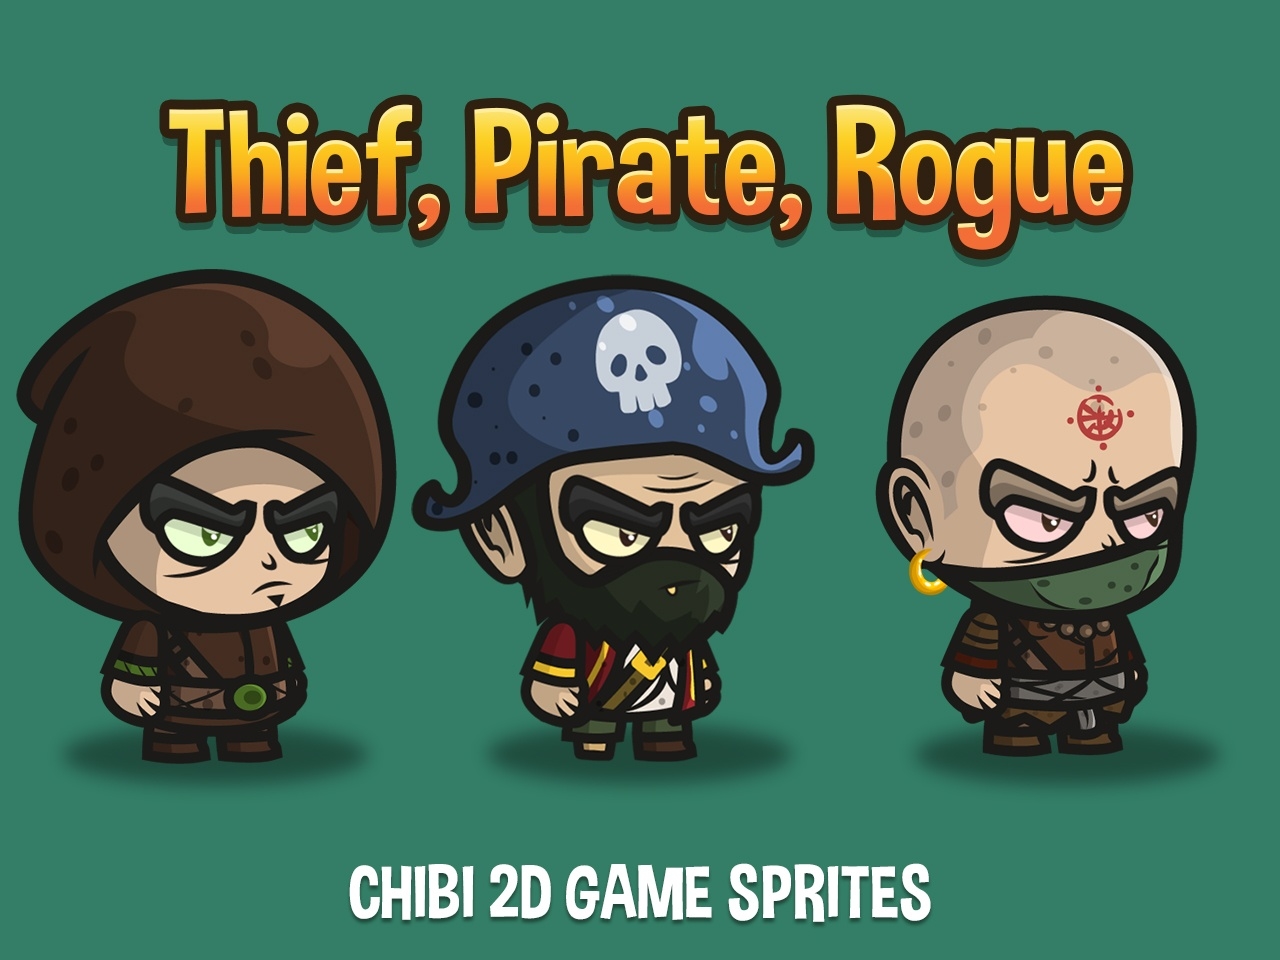 Thief Pirate Rogue Chibi 2d Sprites by 2D Game Assets on Dribbble